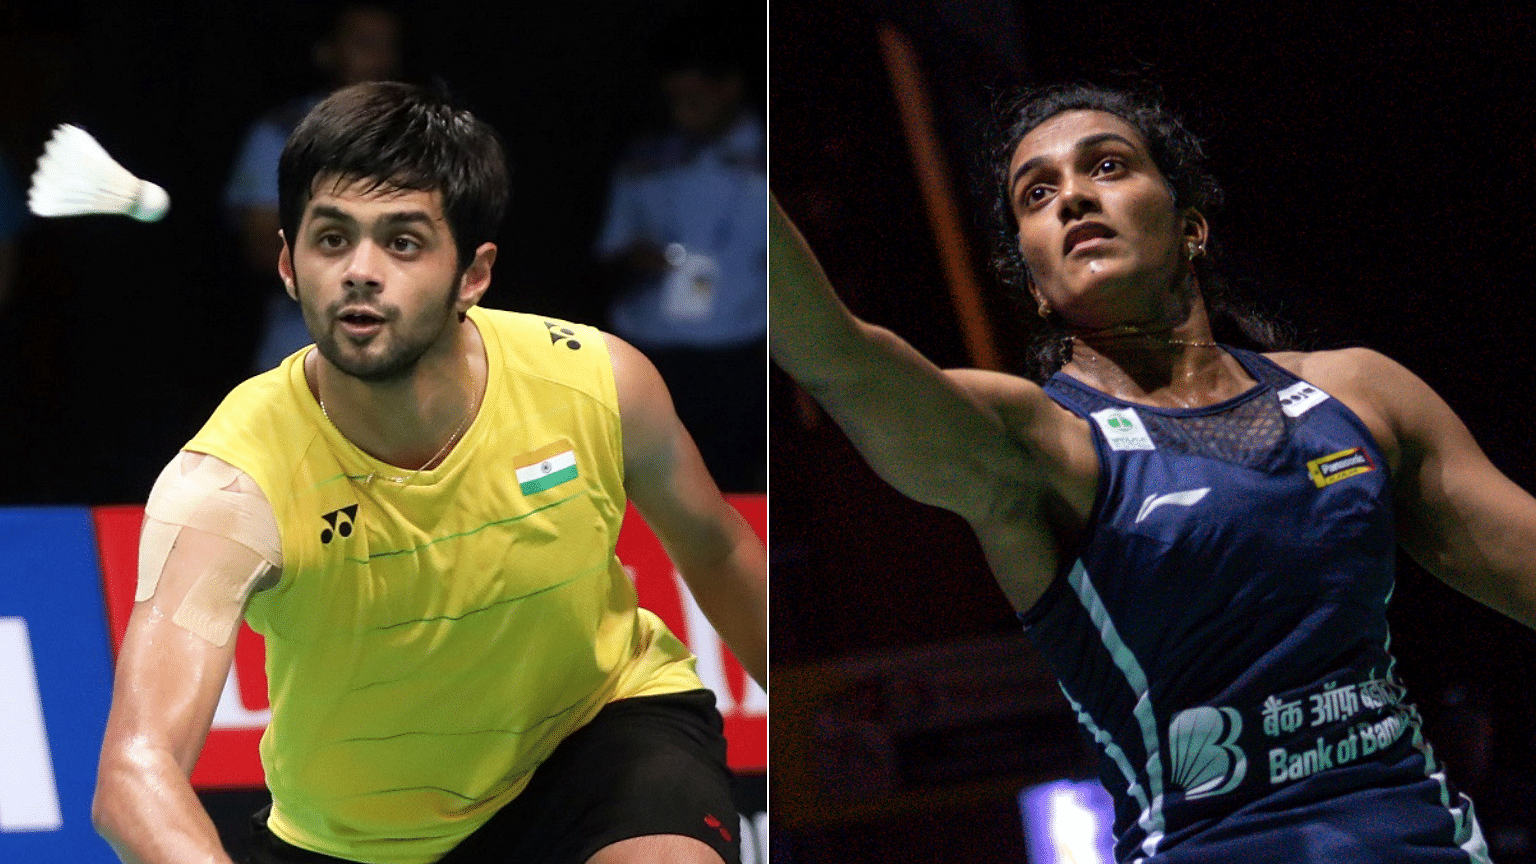 Shuttlers PV Sindhu and B Sai Praneeth lost their respective second round matches as India’s campaign at the Denmark Open ended.